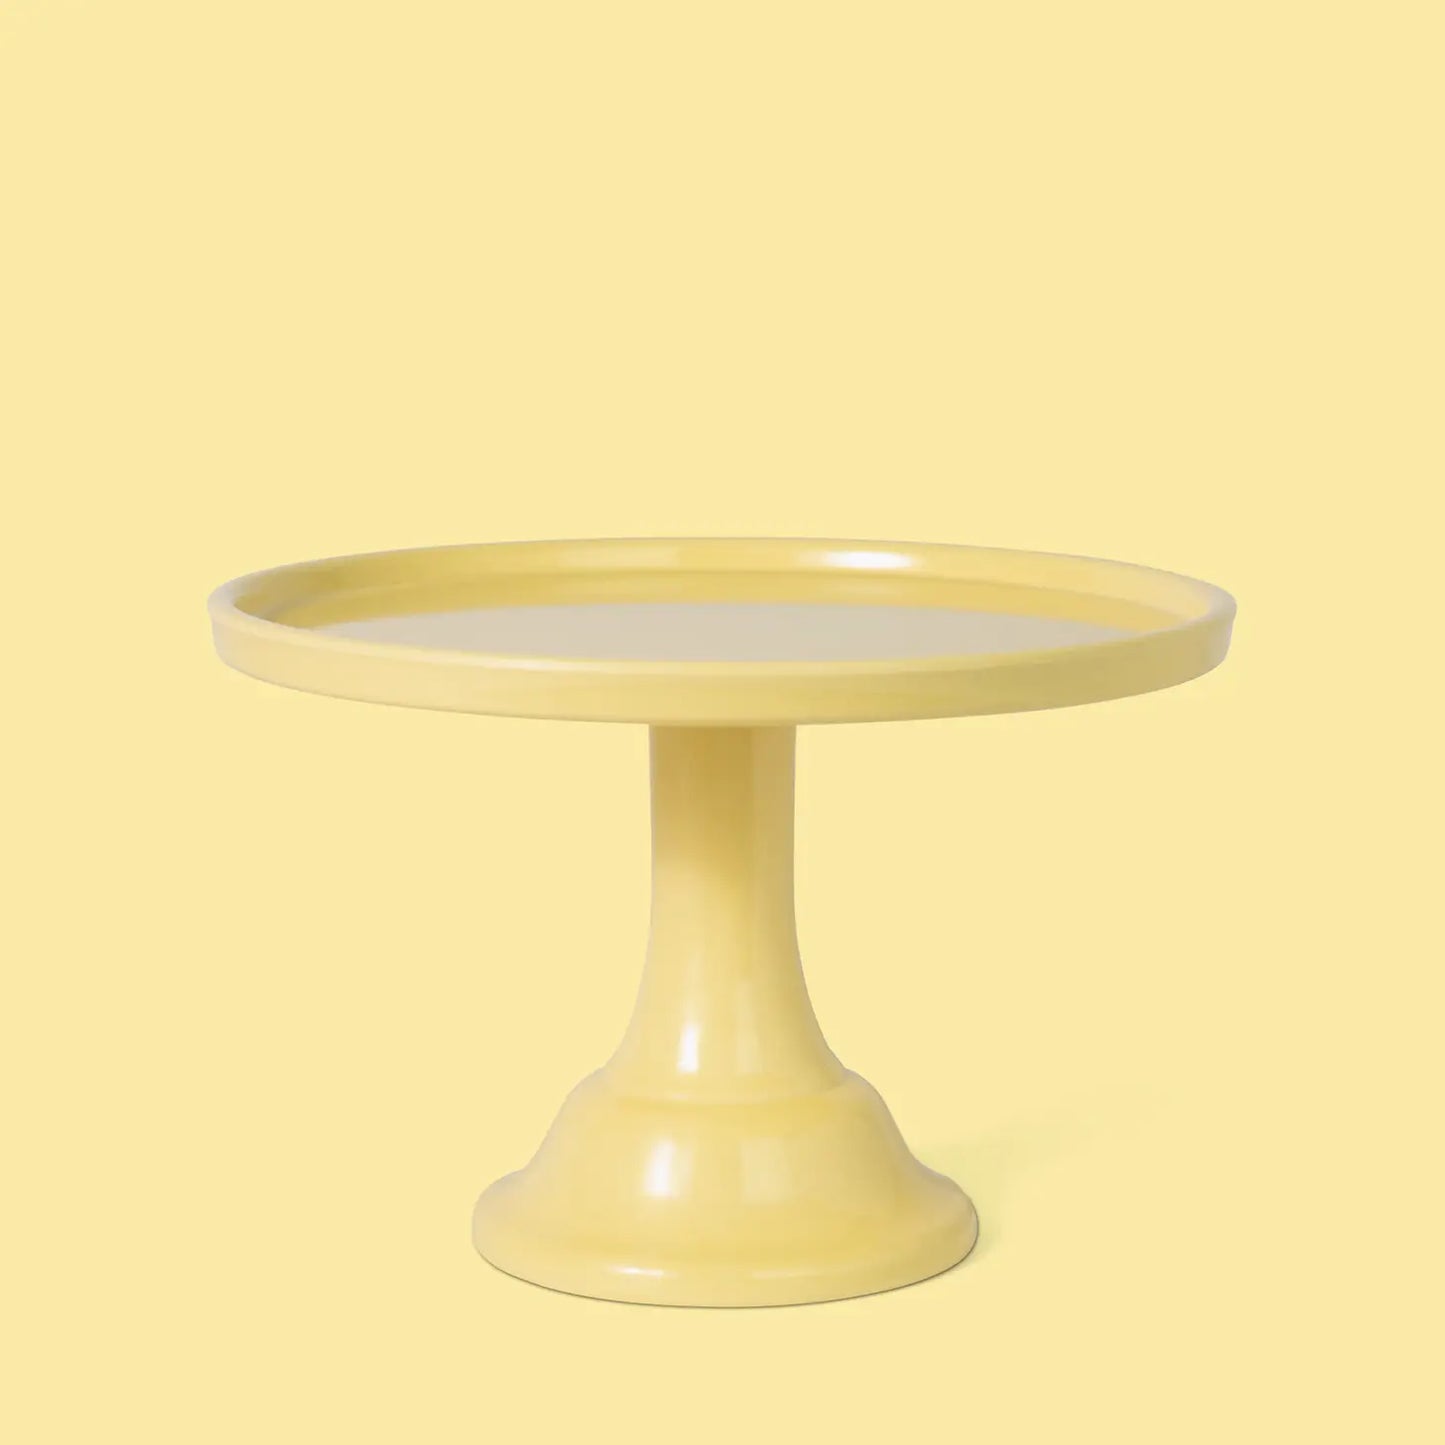 Melamine Bespoke Cake Stand Small - Daisy Yellow PRE ORDER ONLY Late June Arrival